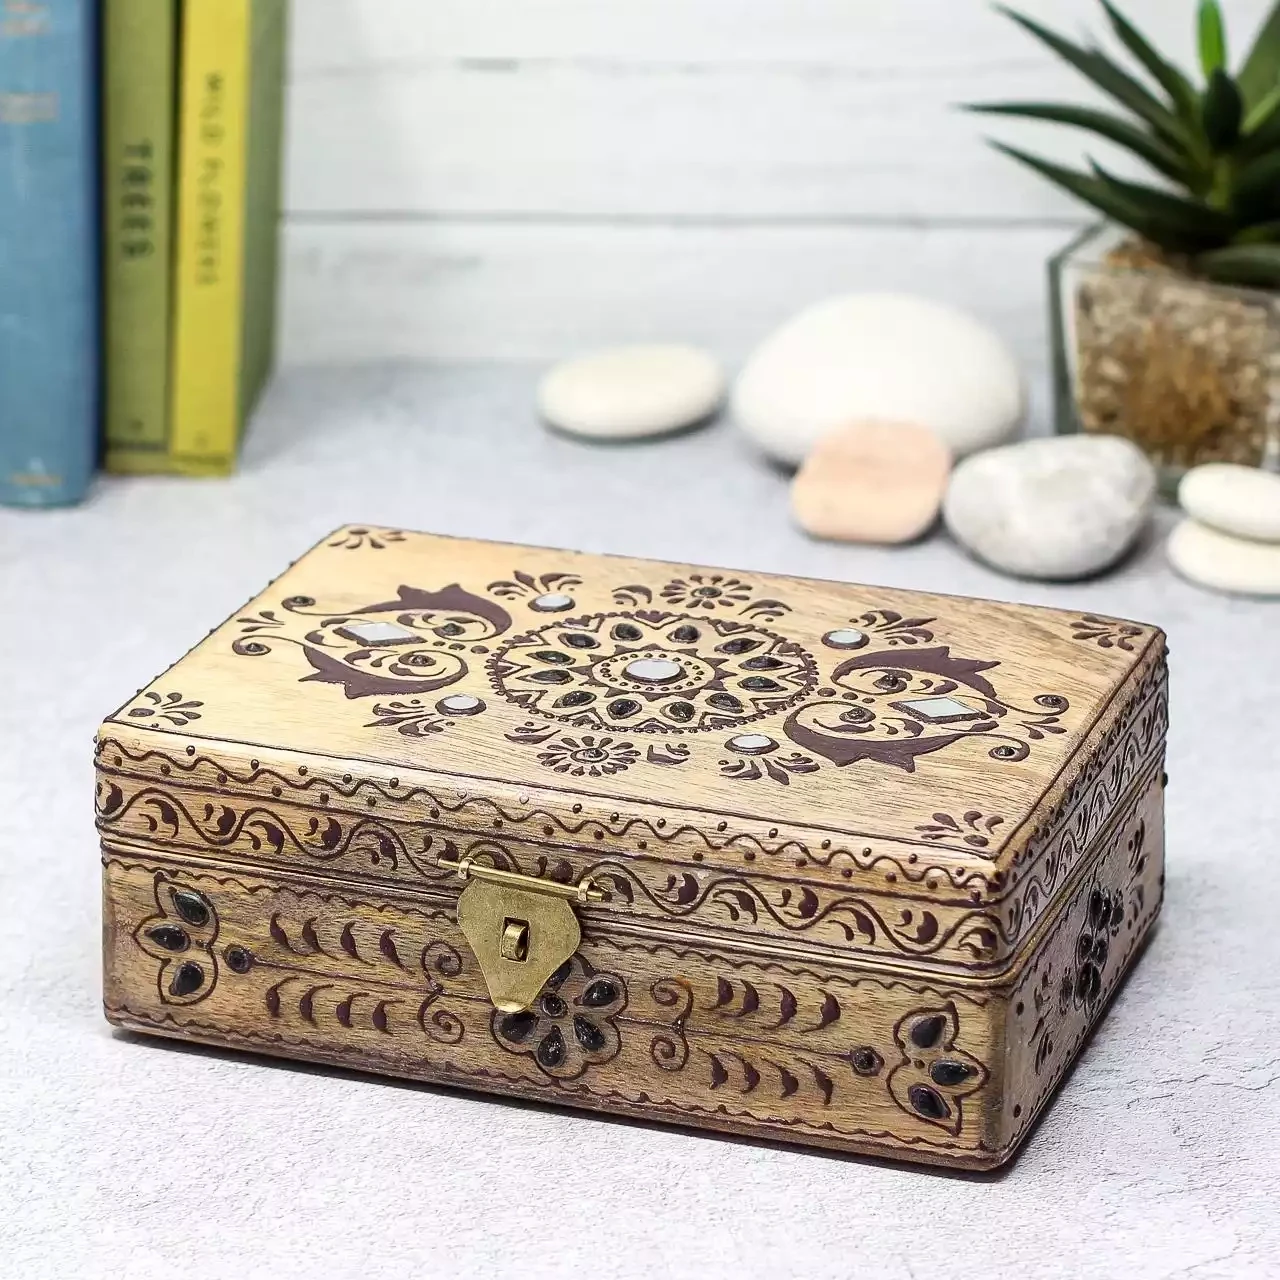 Hand Decorated Jewelled Lidded Wooden Box by Namaste